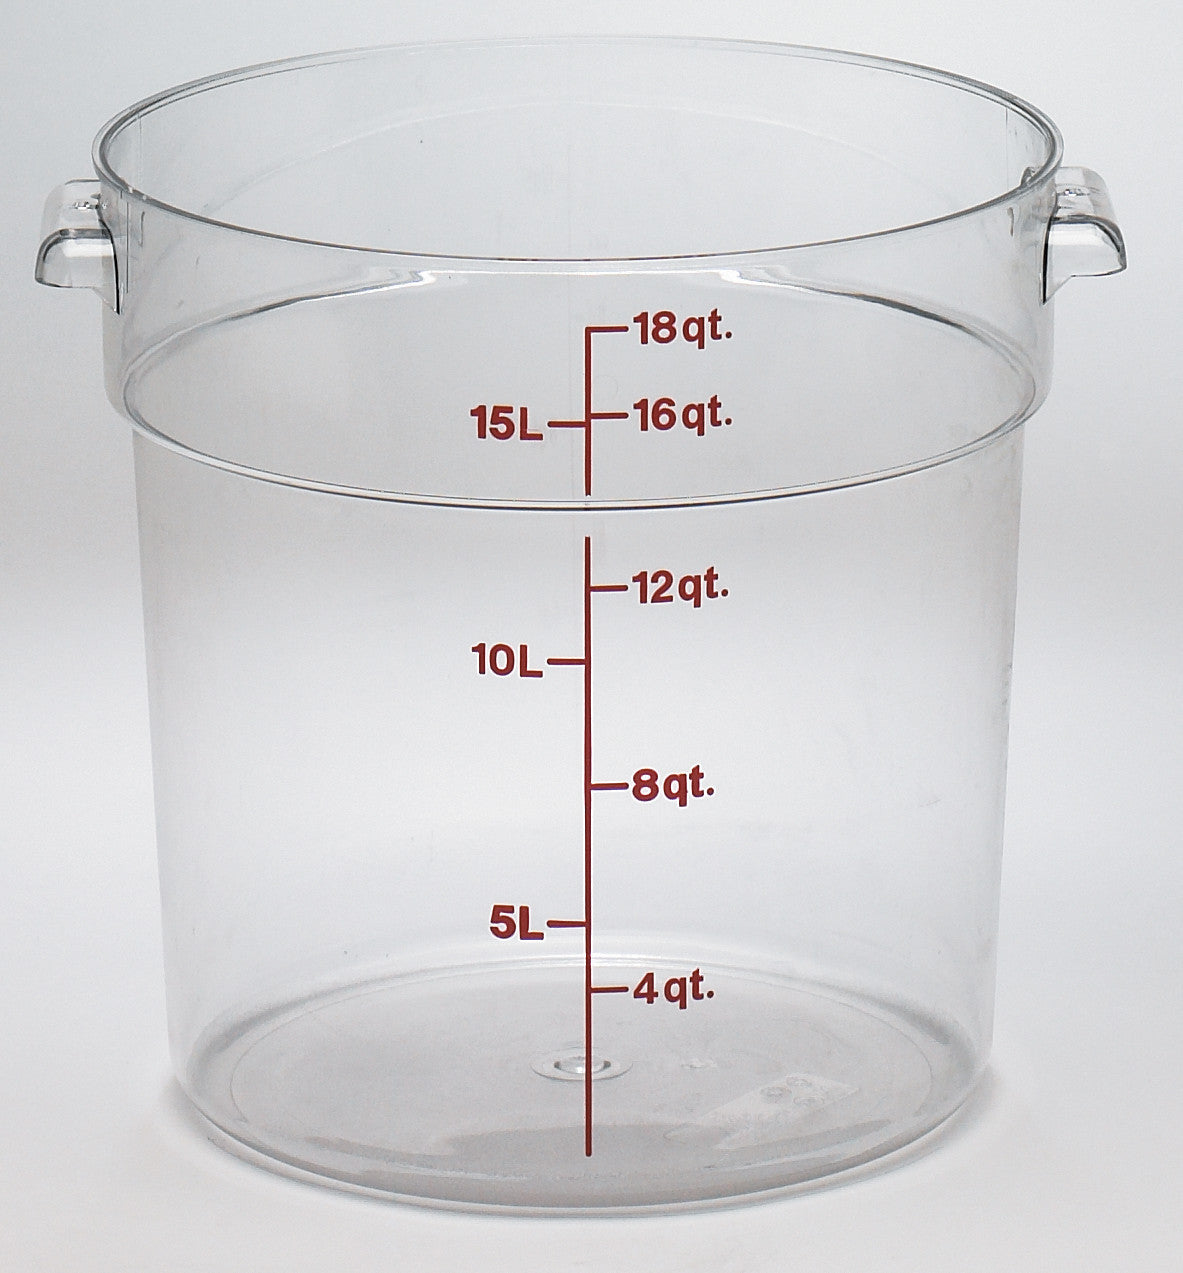 Cambro Round Clear Container, Food Container - eKitchenary